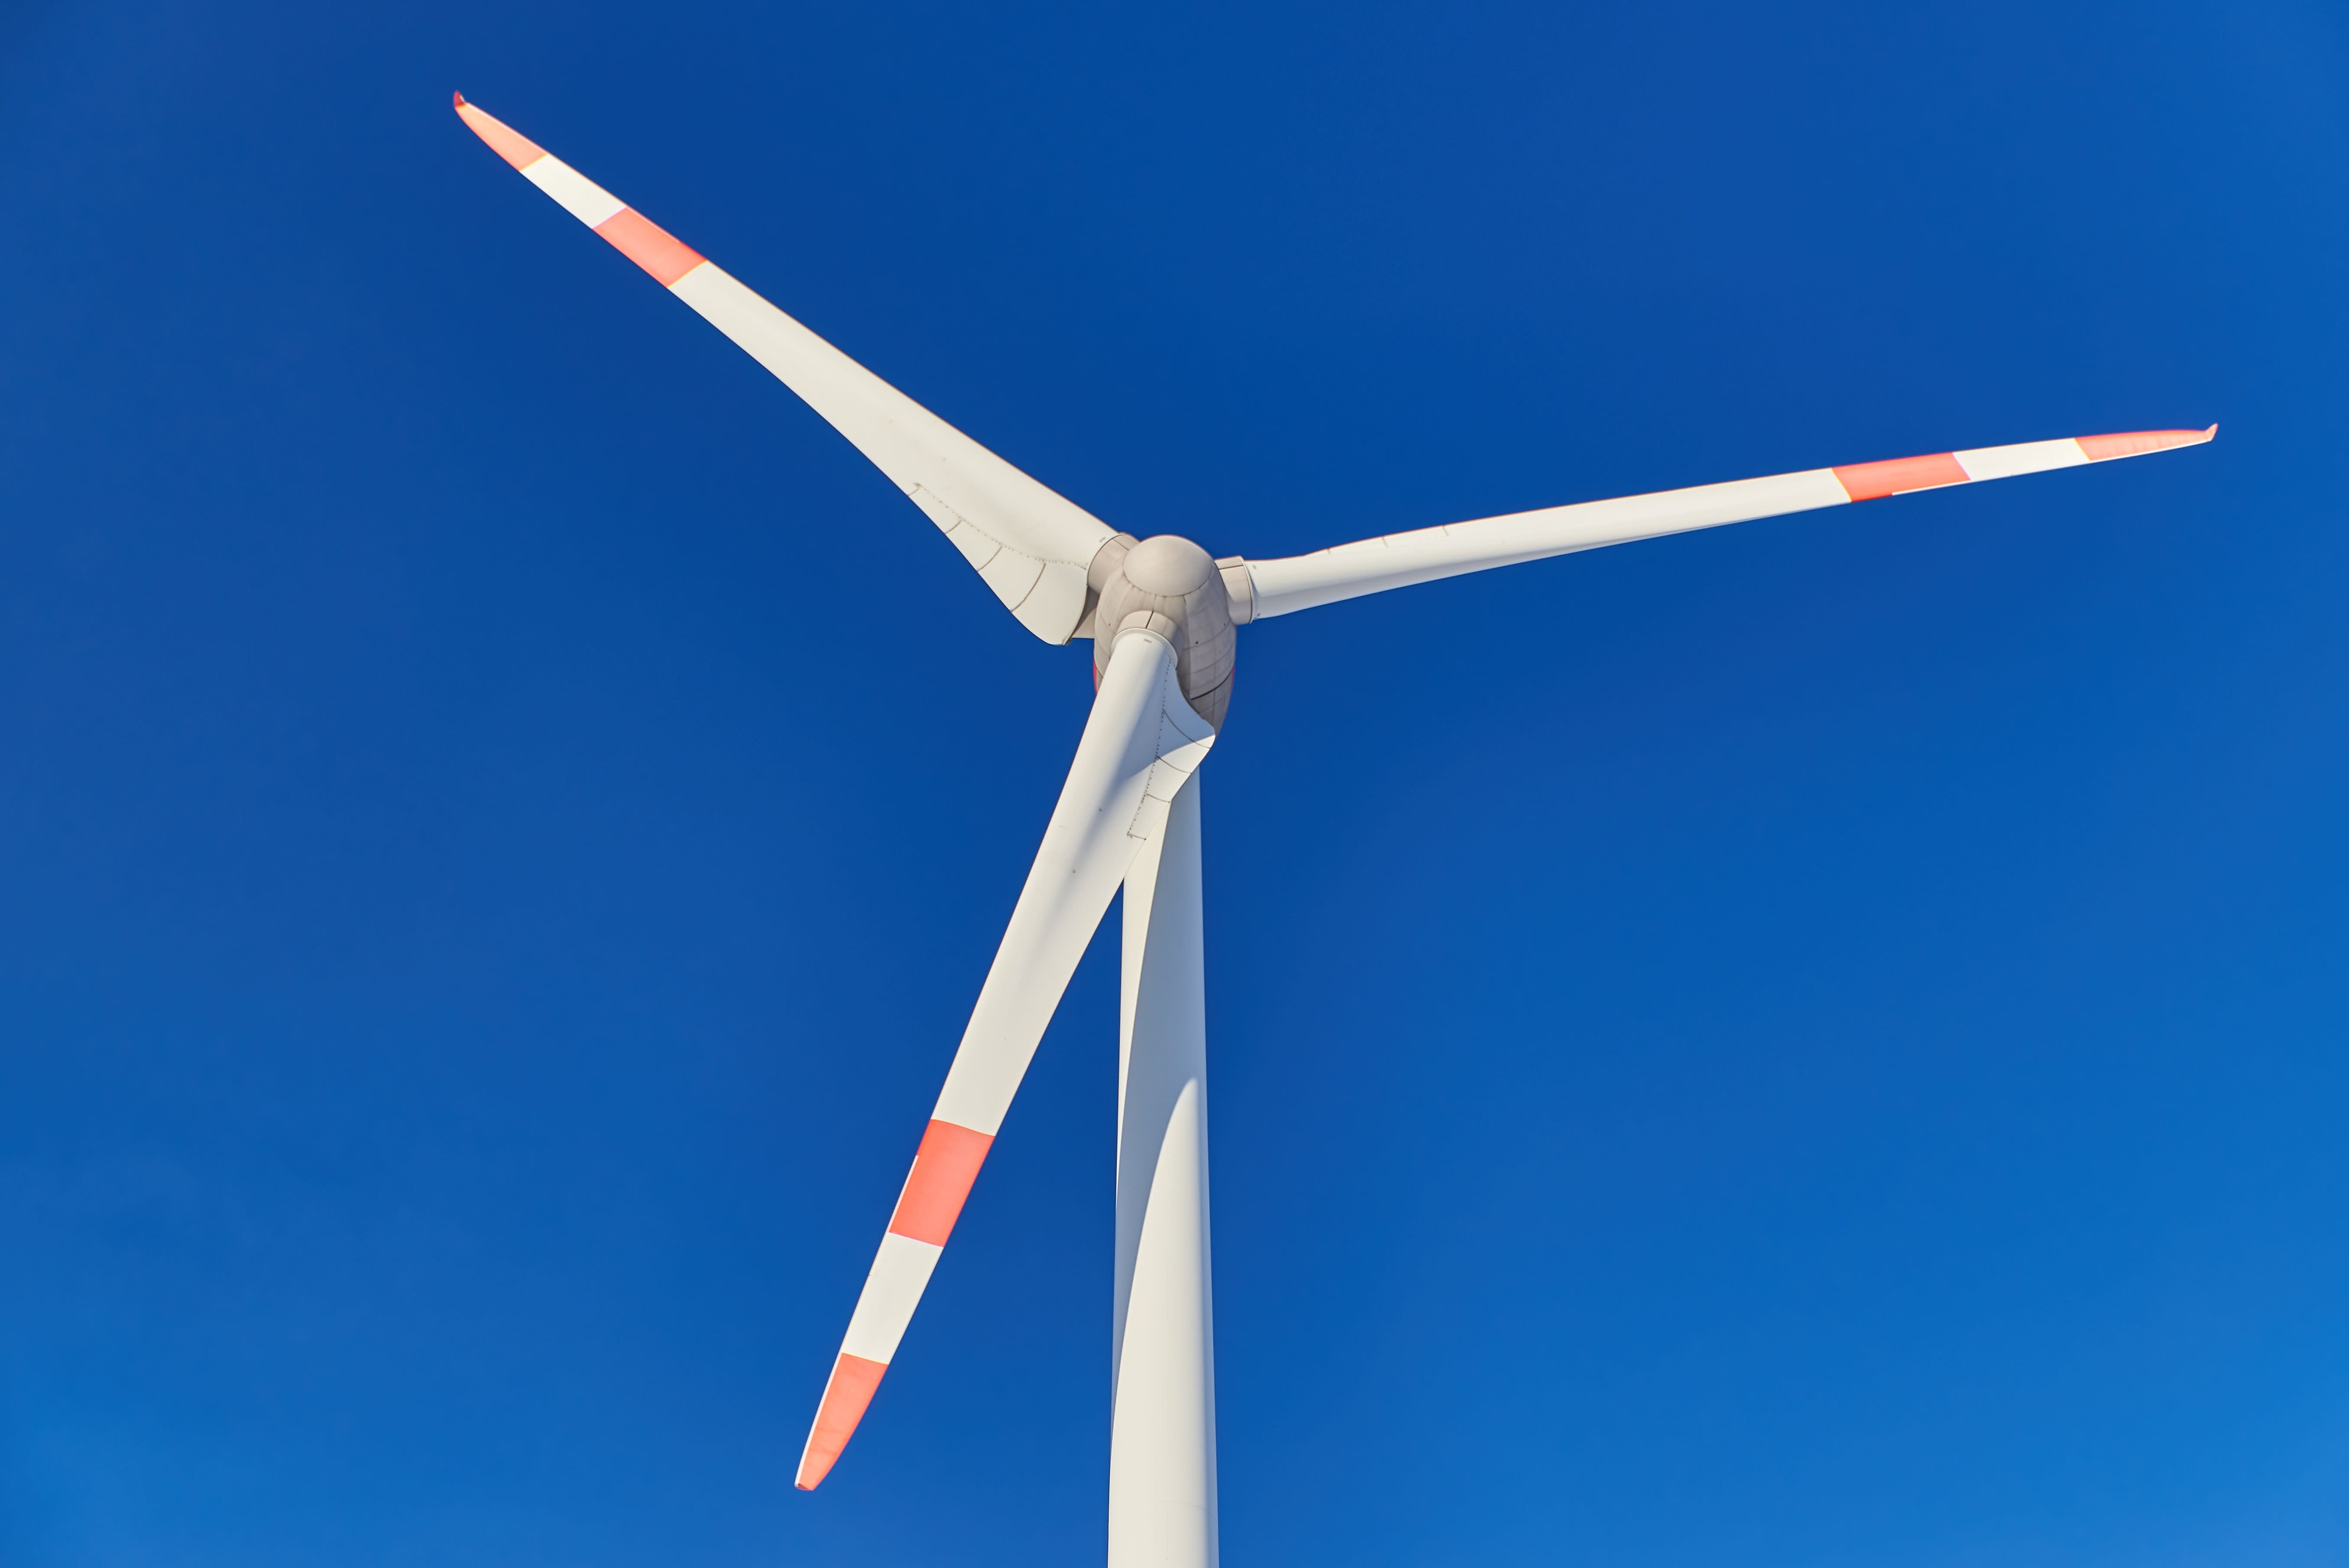 Danish energy giant Orsted is pivoting to onshore wind in new $684 million deal